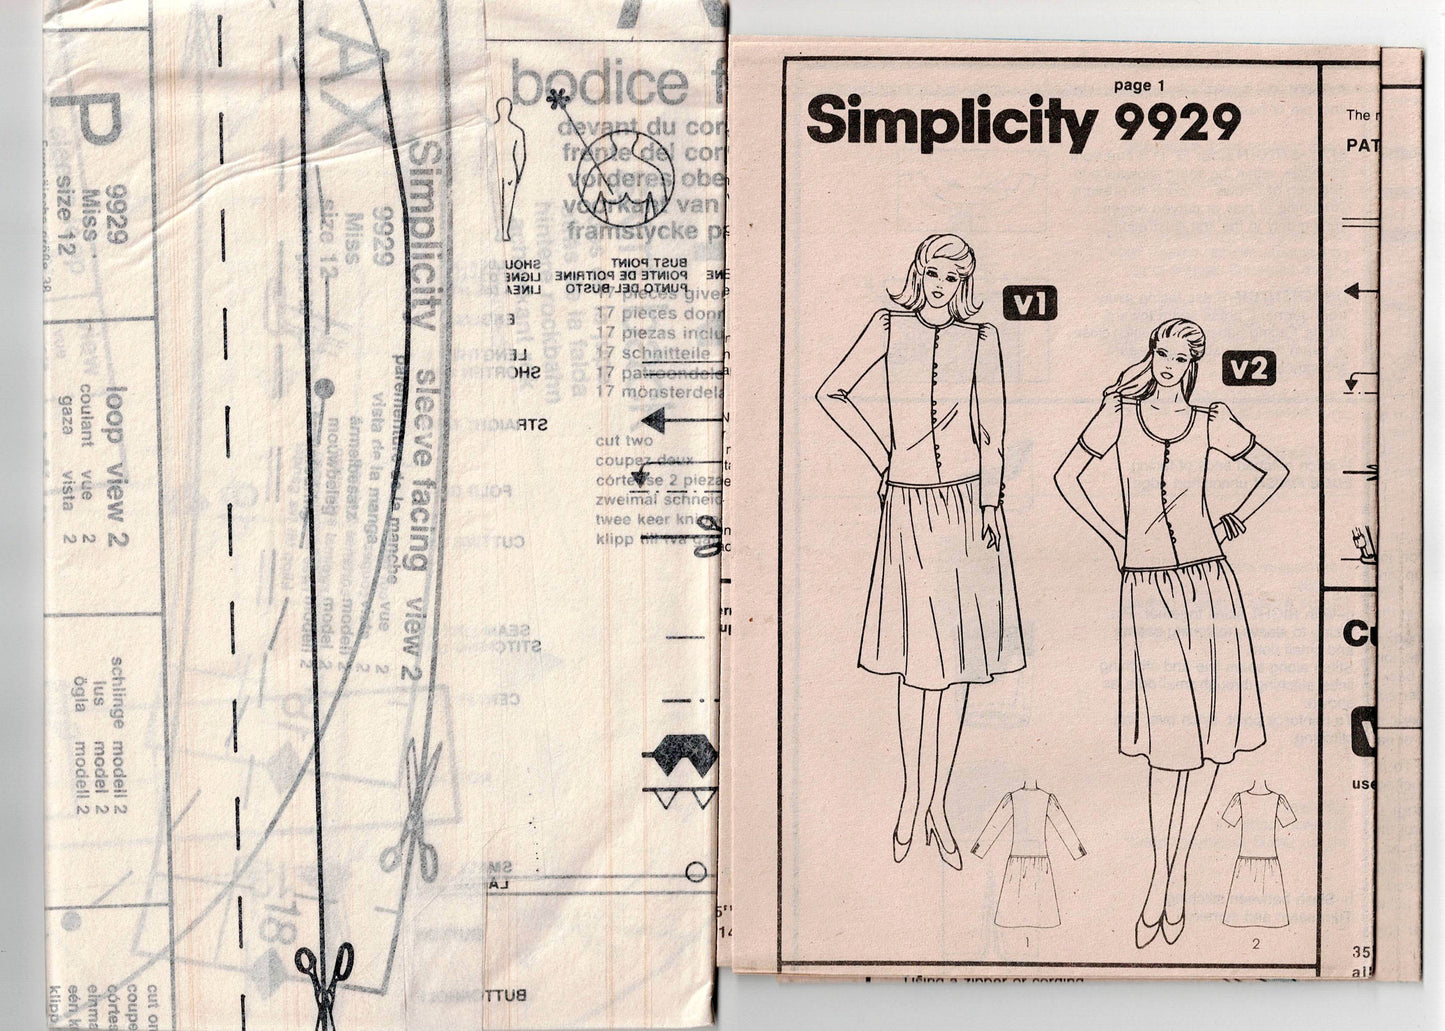 Simplicity 9929 Womens MARY McFADDEN Drop Waisted Dress 1980s Vintage Sewing Pattern Size 12 Bust 34 inches UNCUT Factory Folded